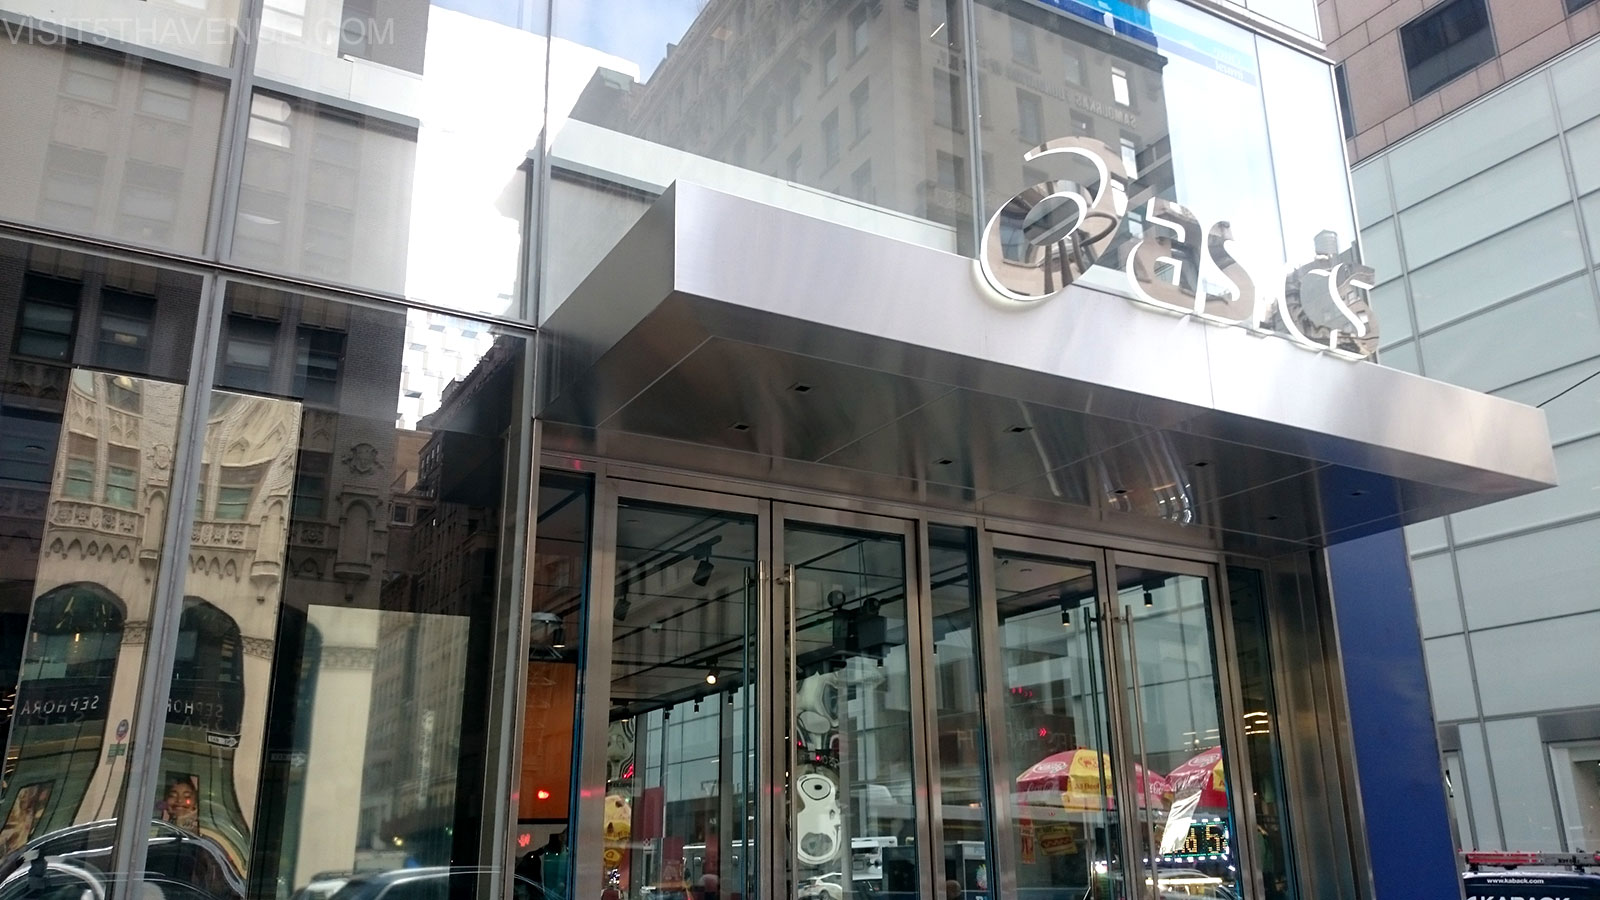 Honorable Ligadura coreano Asics - 5th Avenue, New York - clothing and accessories store